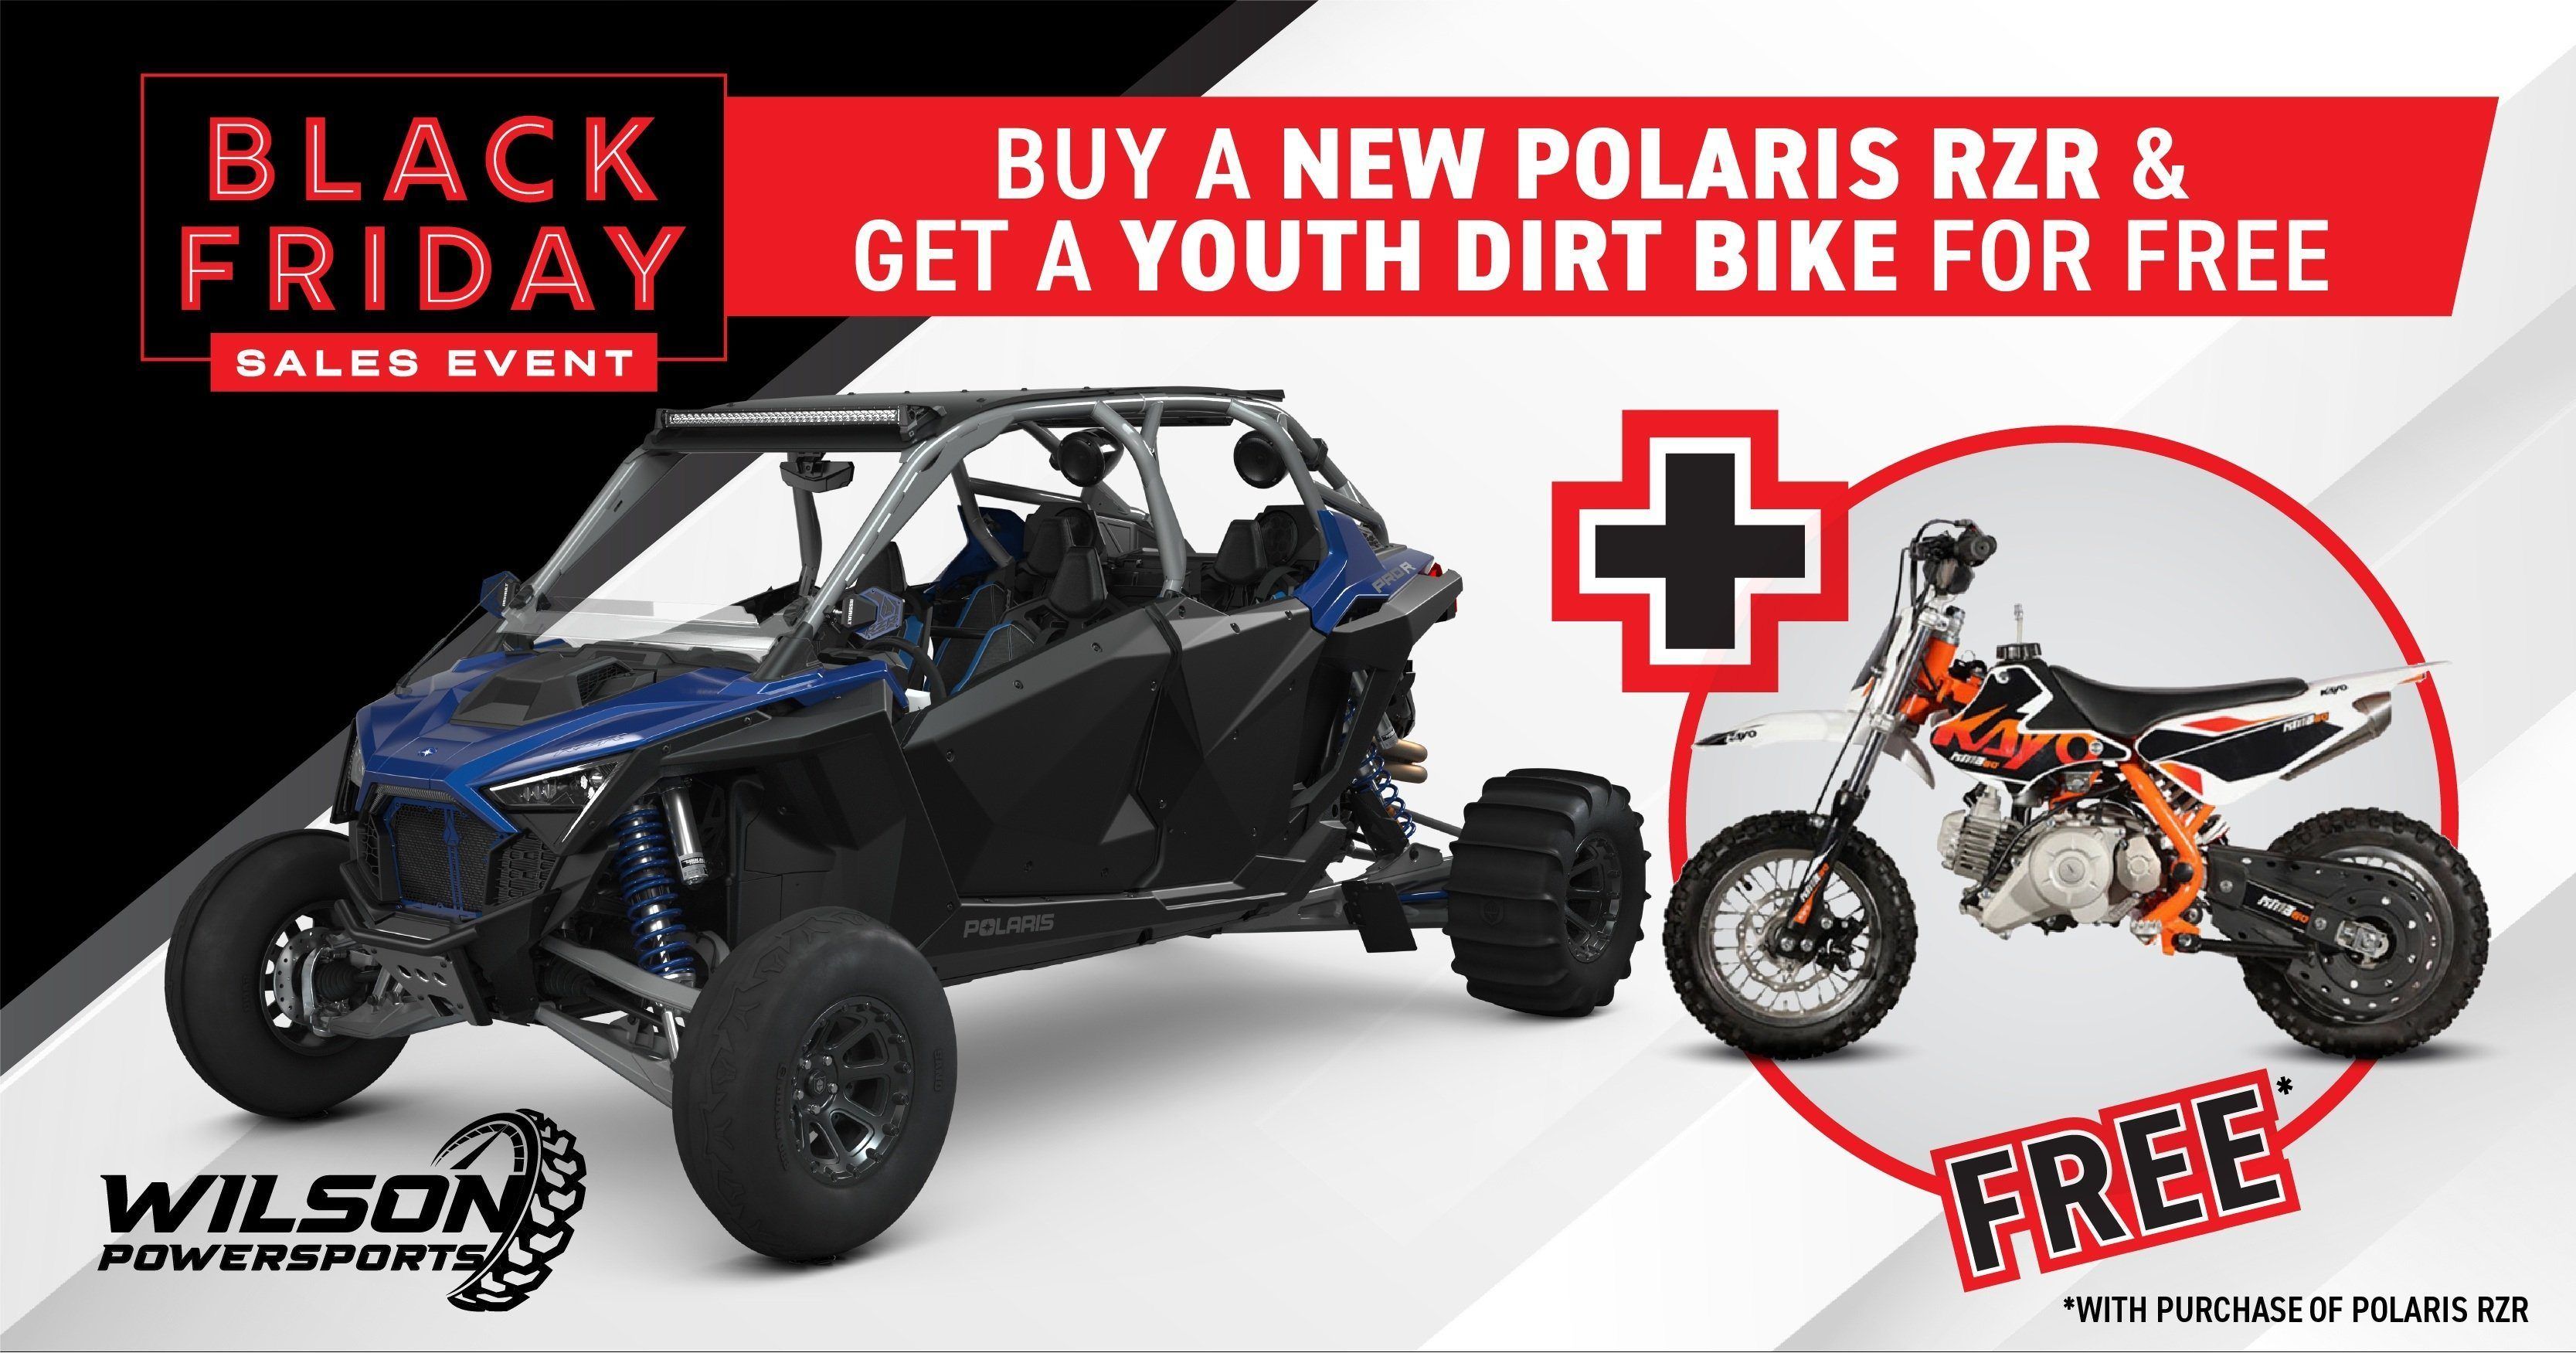 Wilson Powersports Black Friday Sale buy a new Polaris RZR and get a youth dirt bike for free